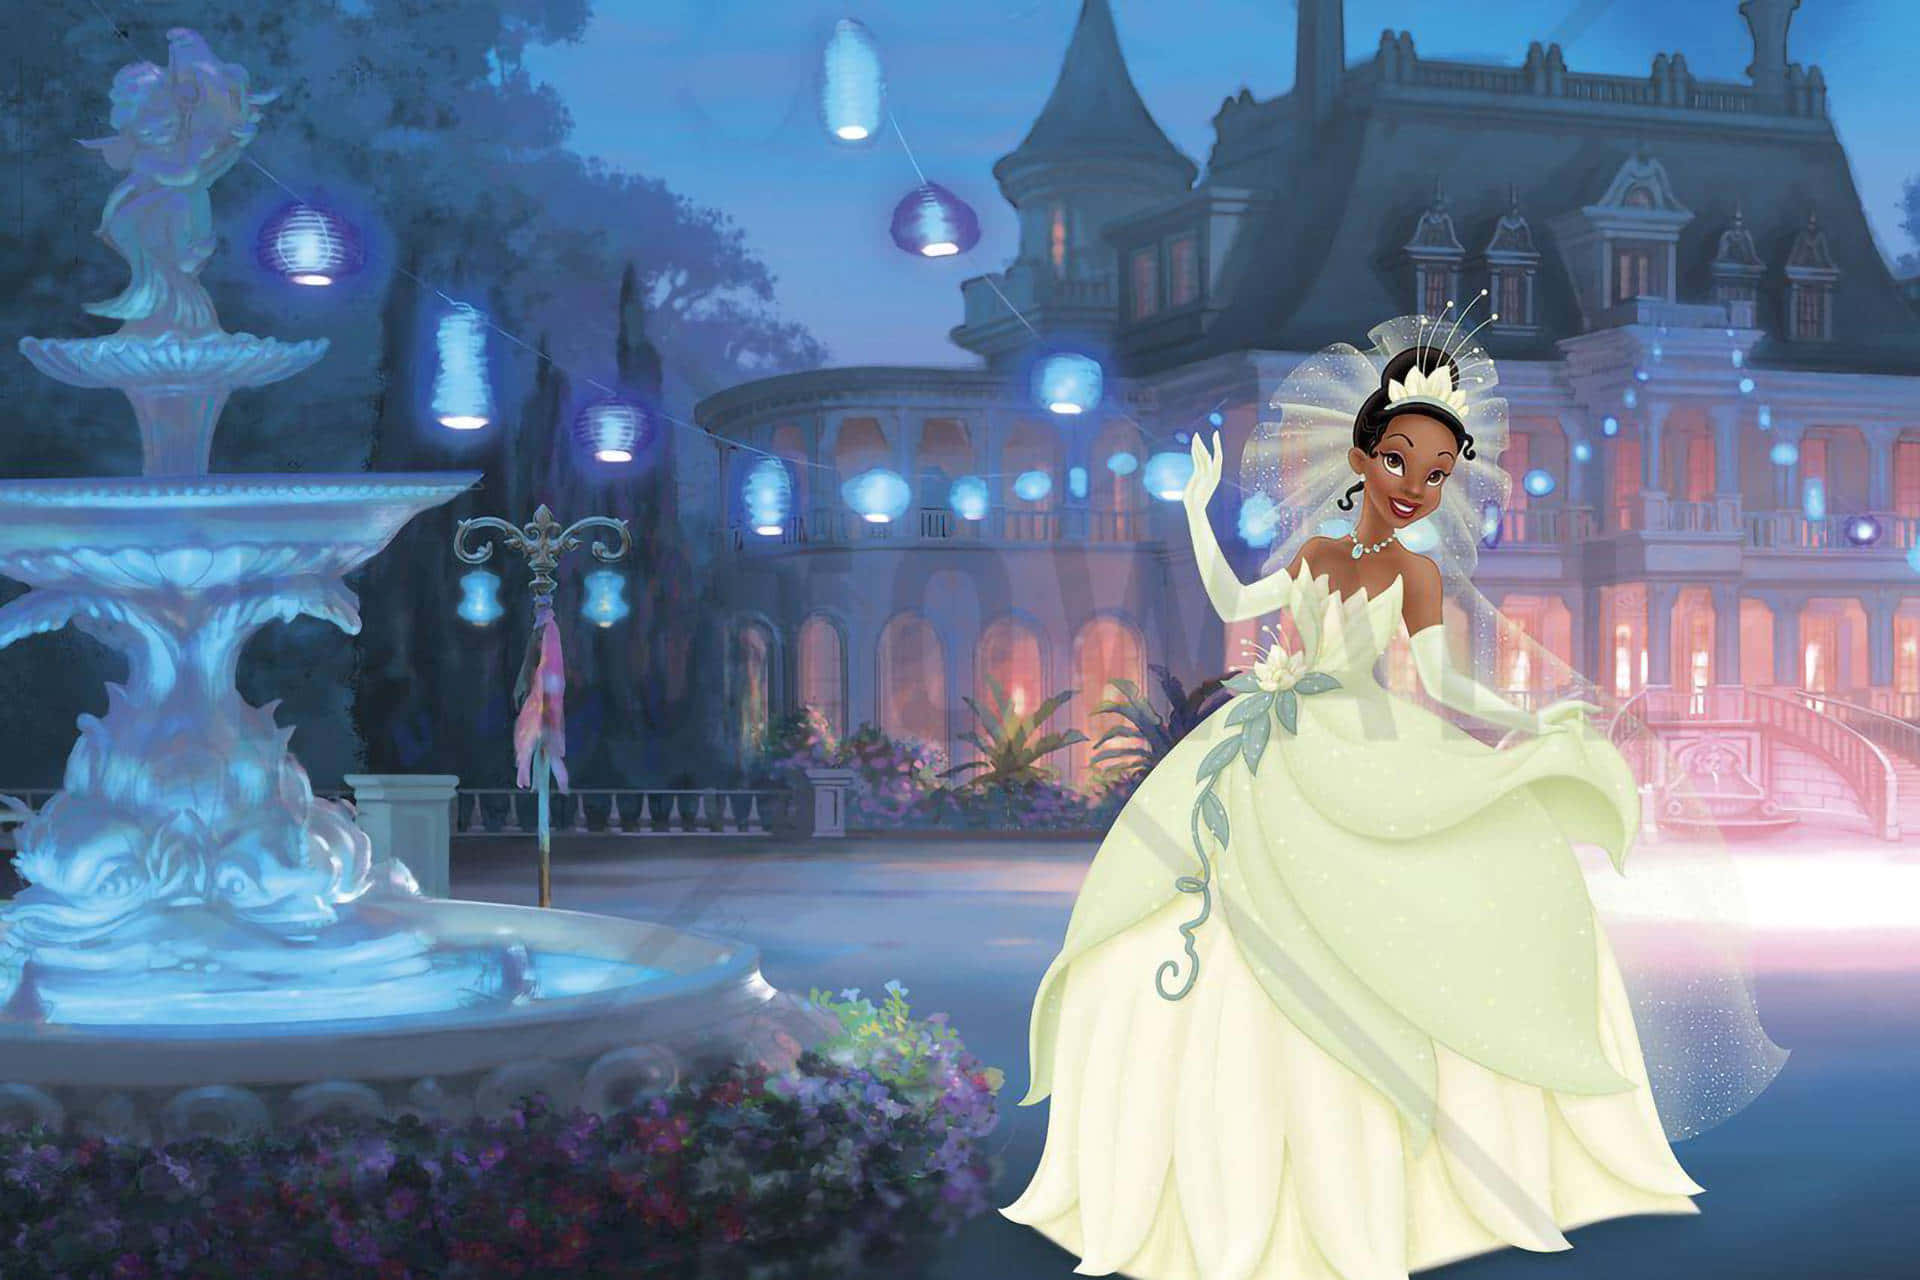 Follow your dreams - the Princess and the Frog